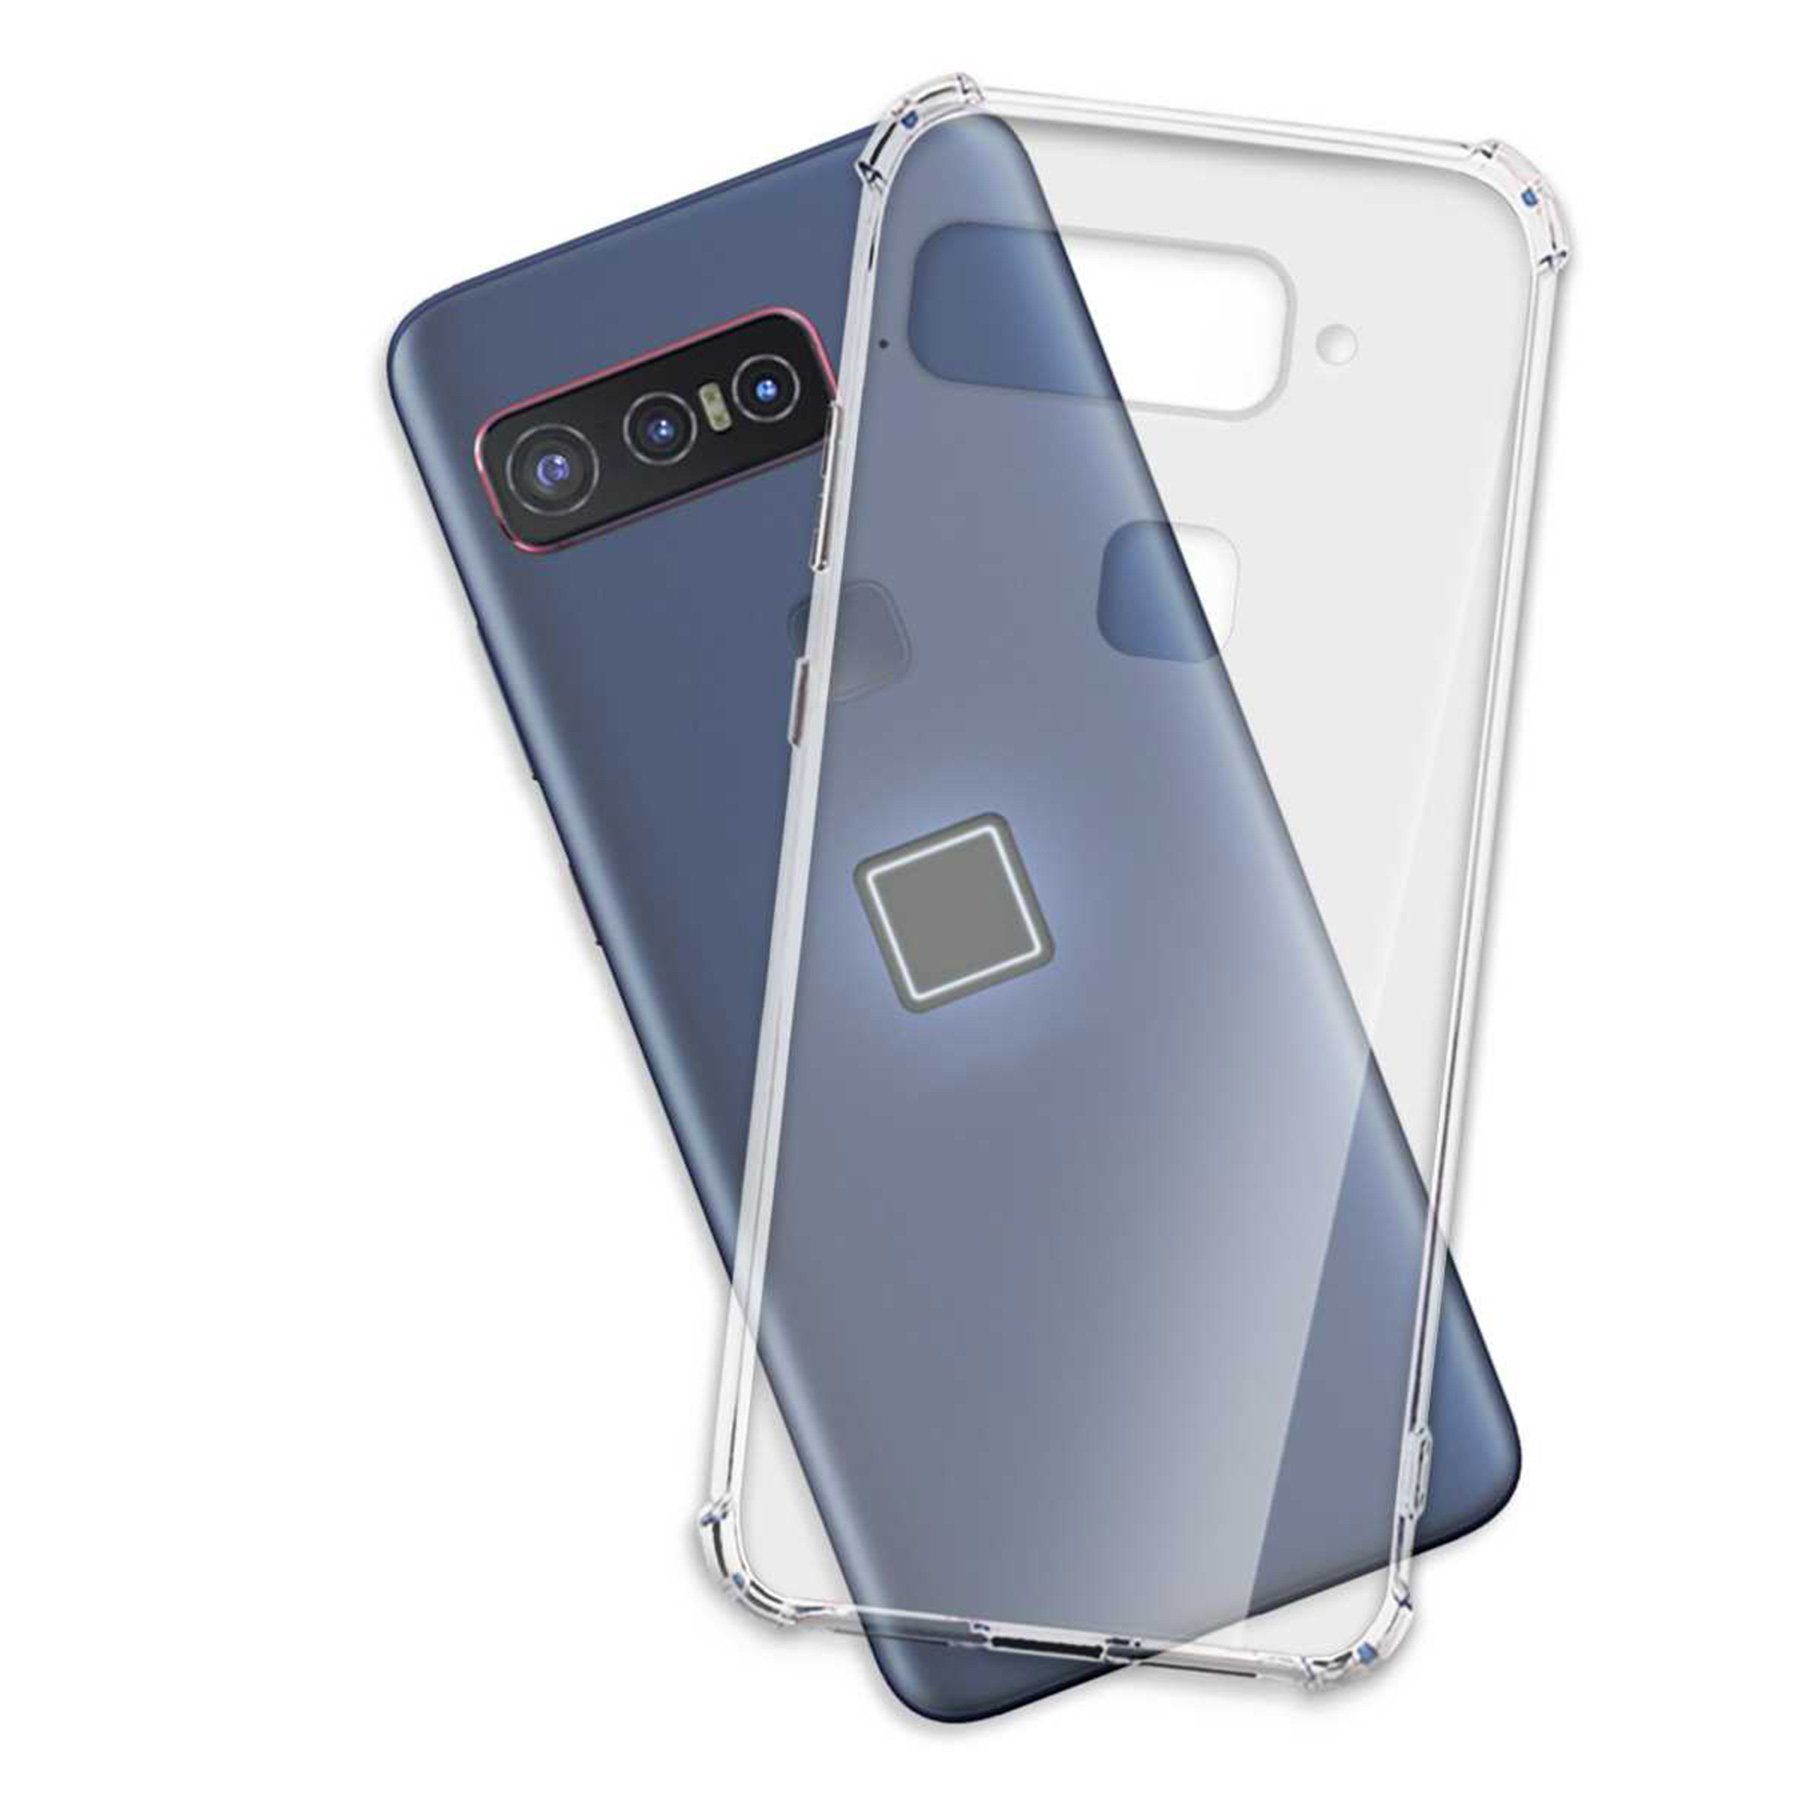 mtb more energy Smartphone-Hülle TPU Clear Armor Soft, für: Asus Smartphone for Snapdragon Insiders